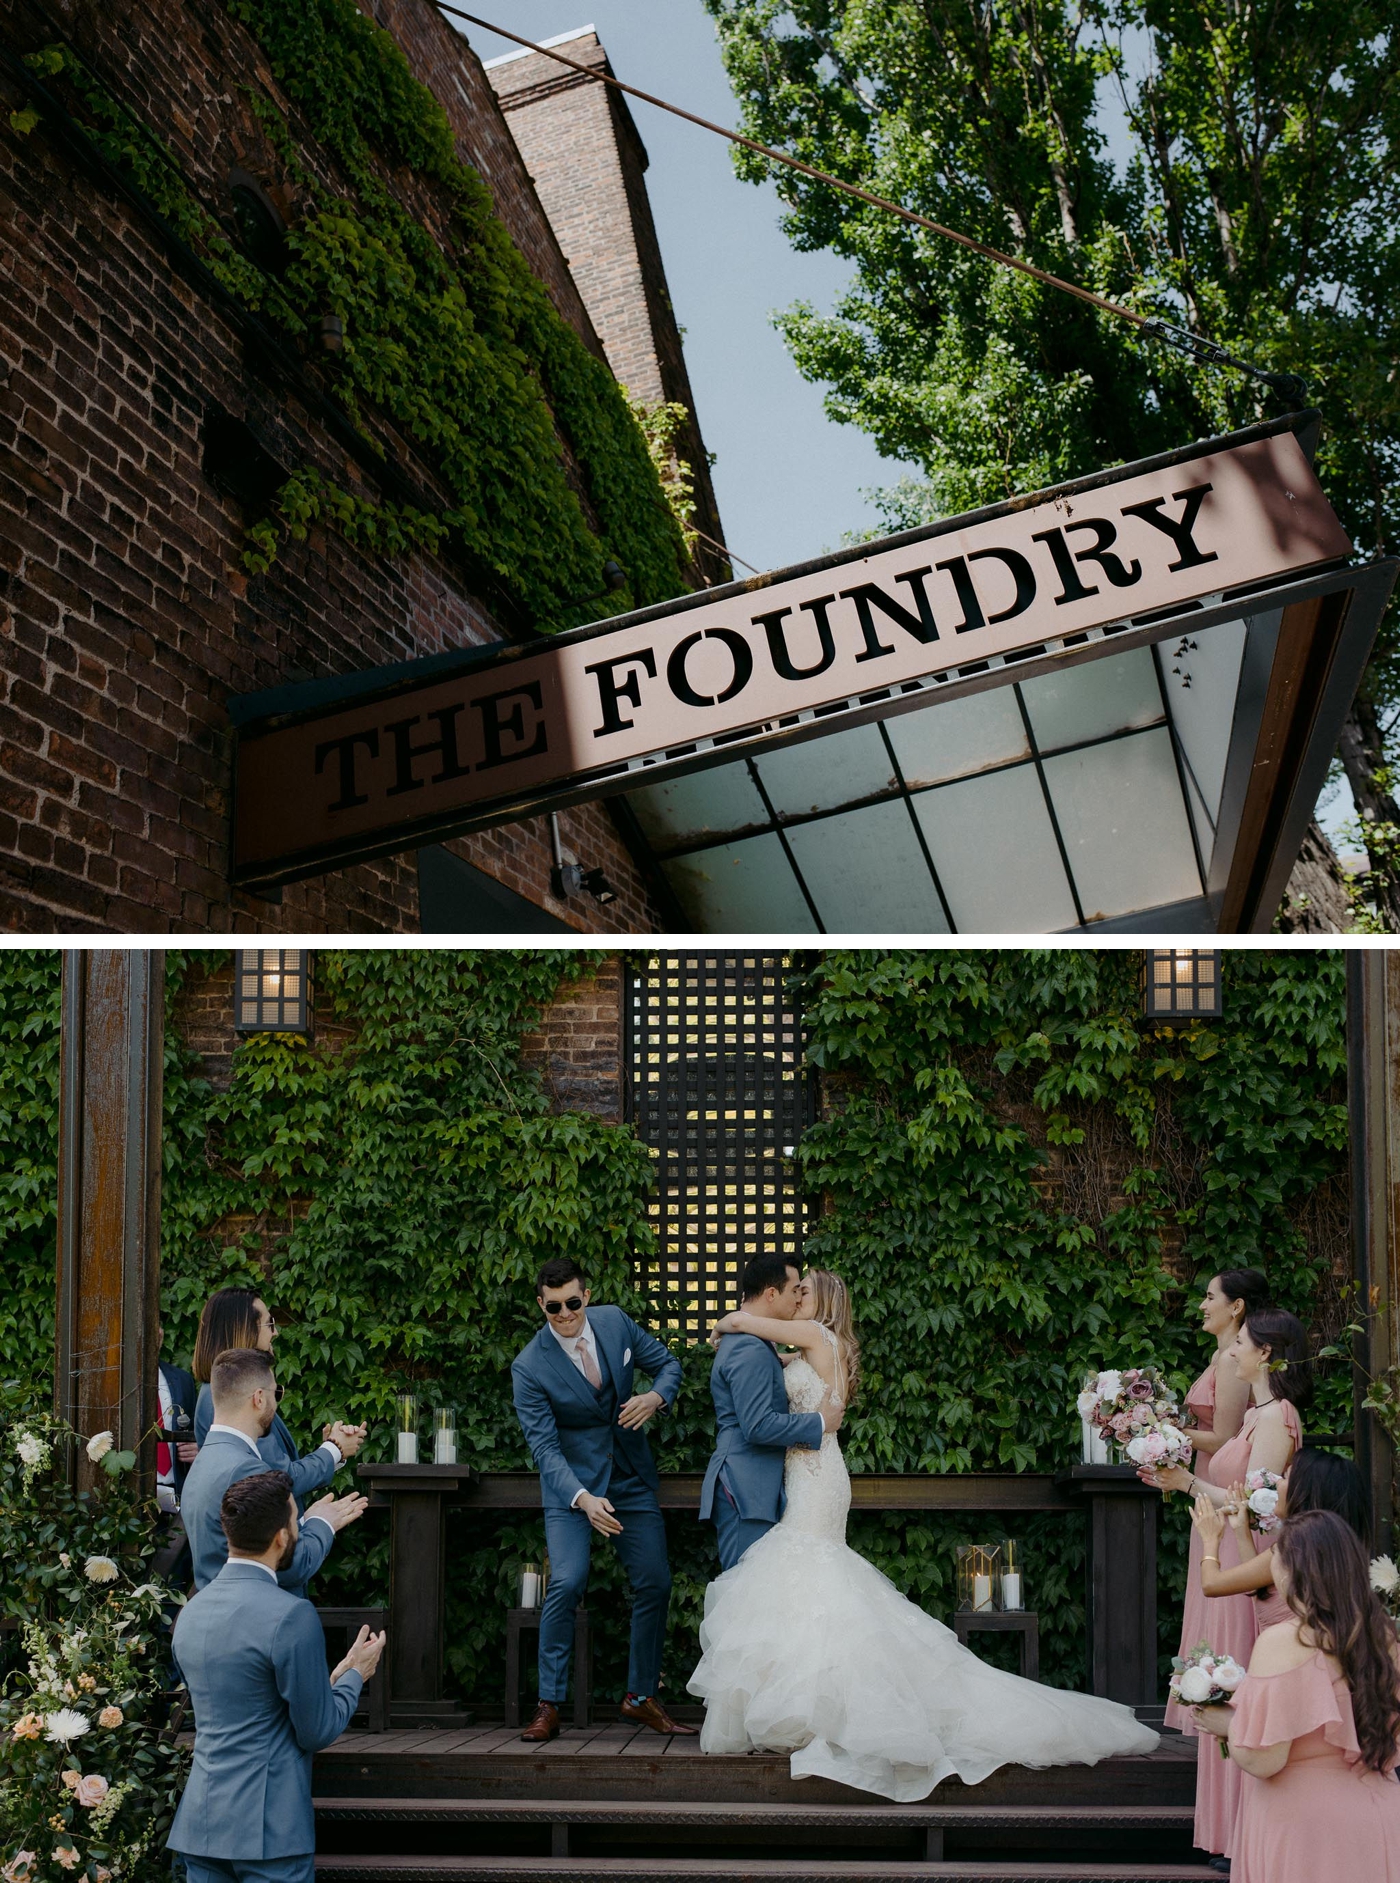  Intimate wedding at The Foundry in Long Island City, NY